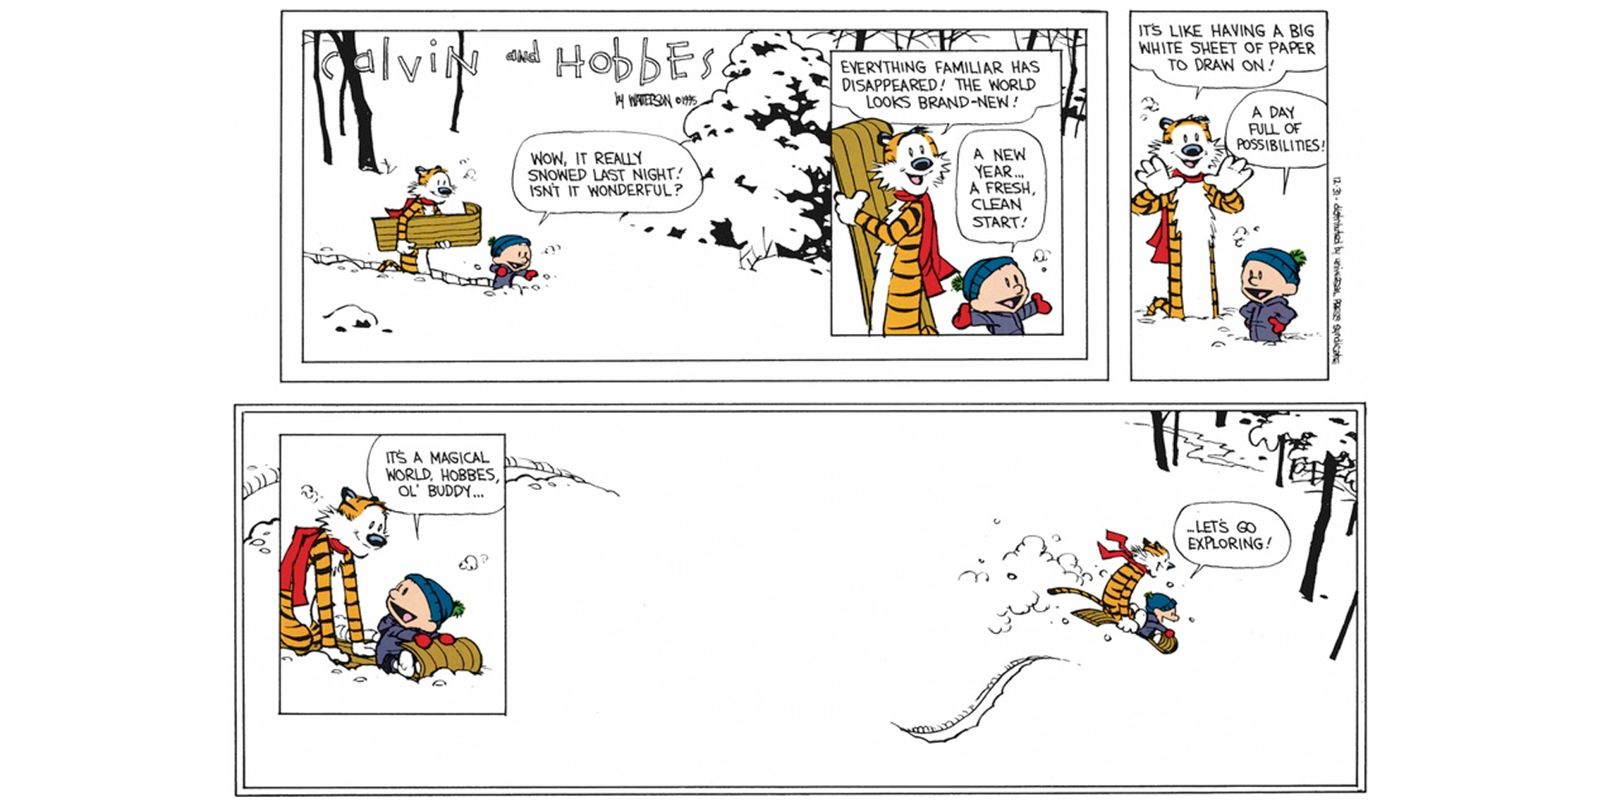 Calvin and Hobbes final comic strip where they sled off to go exploring